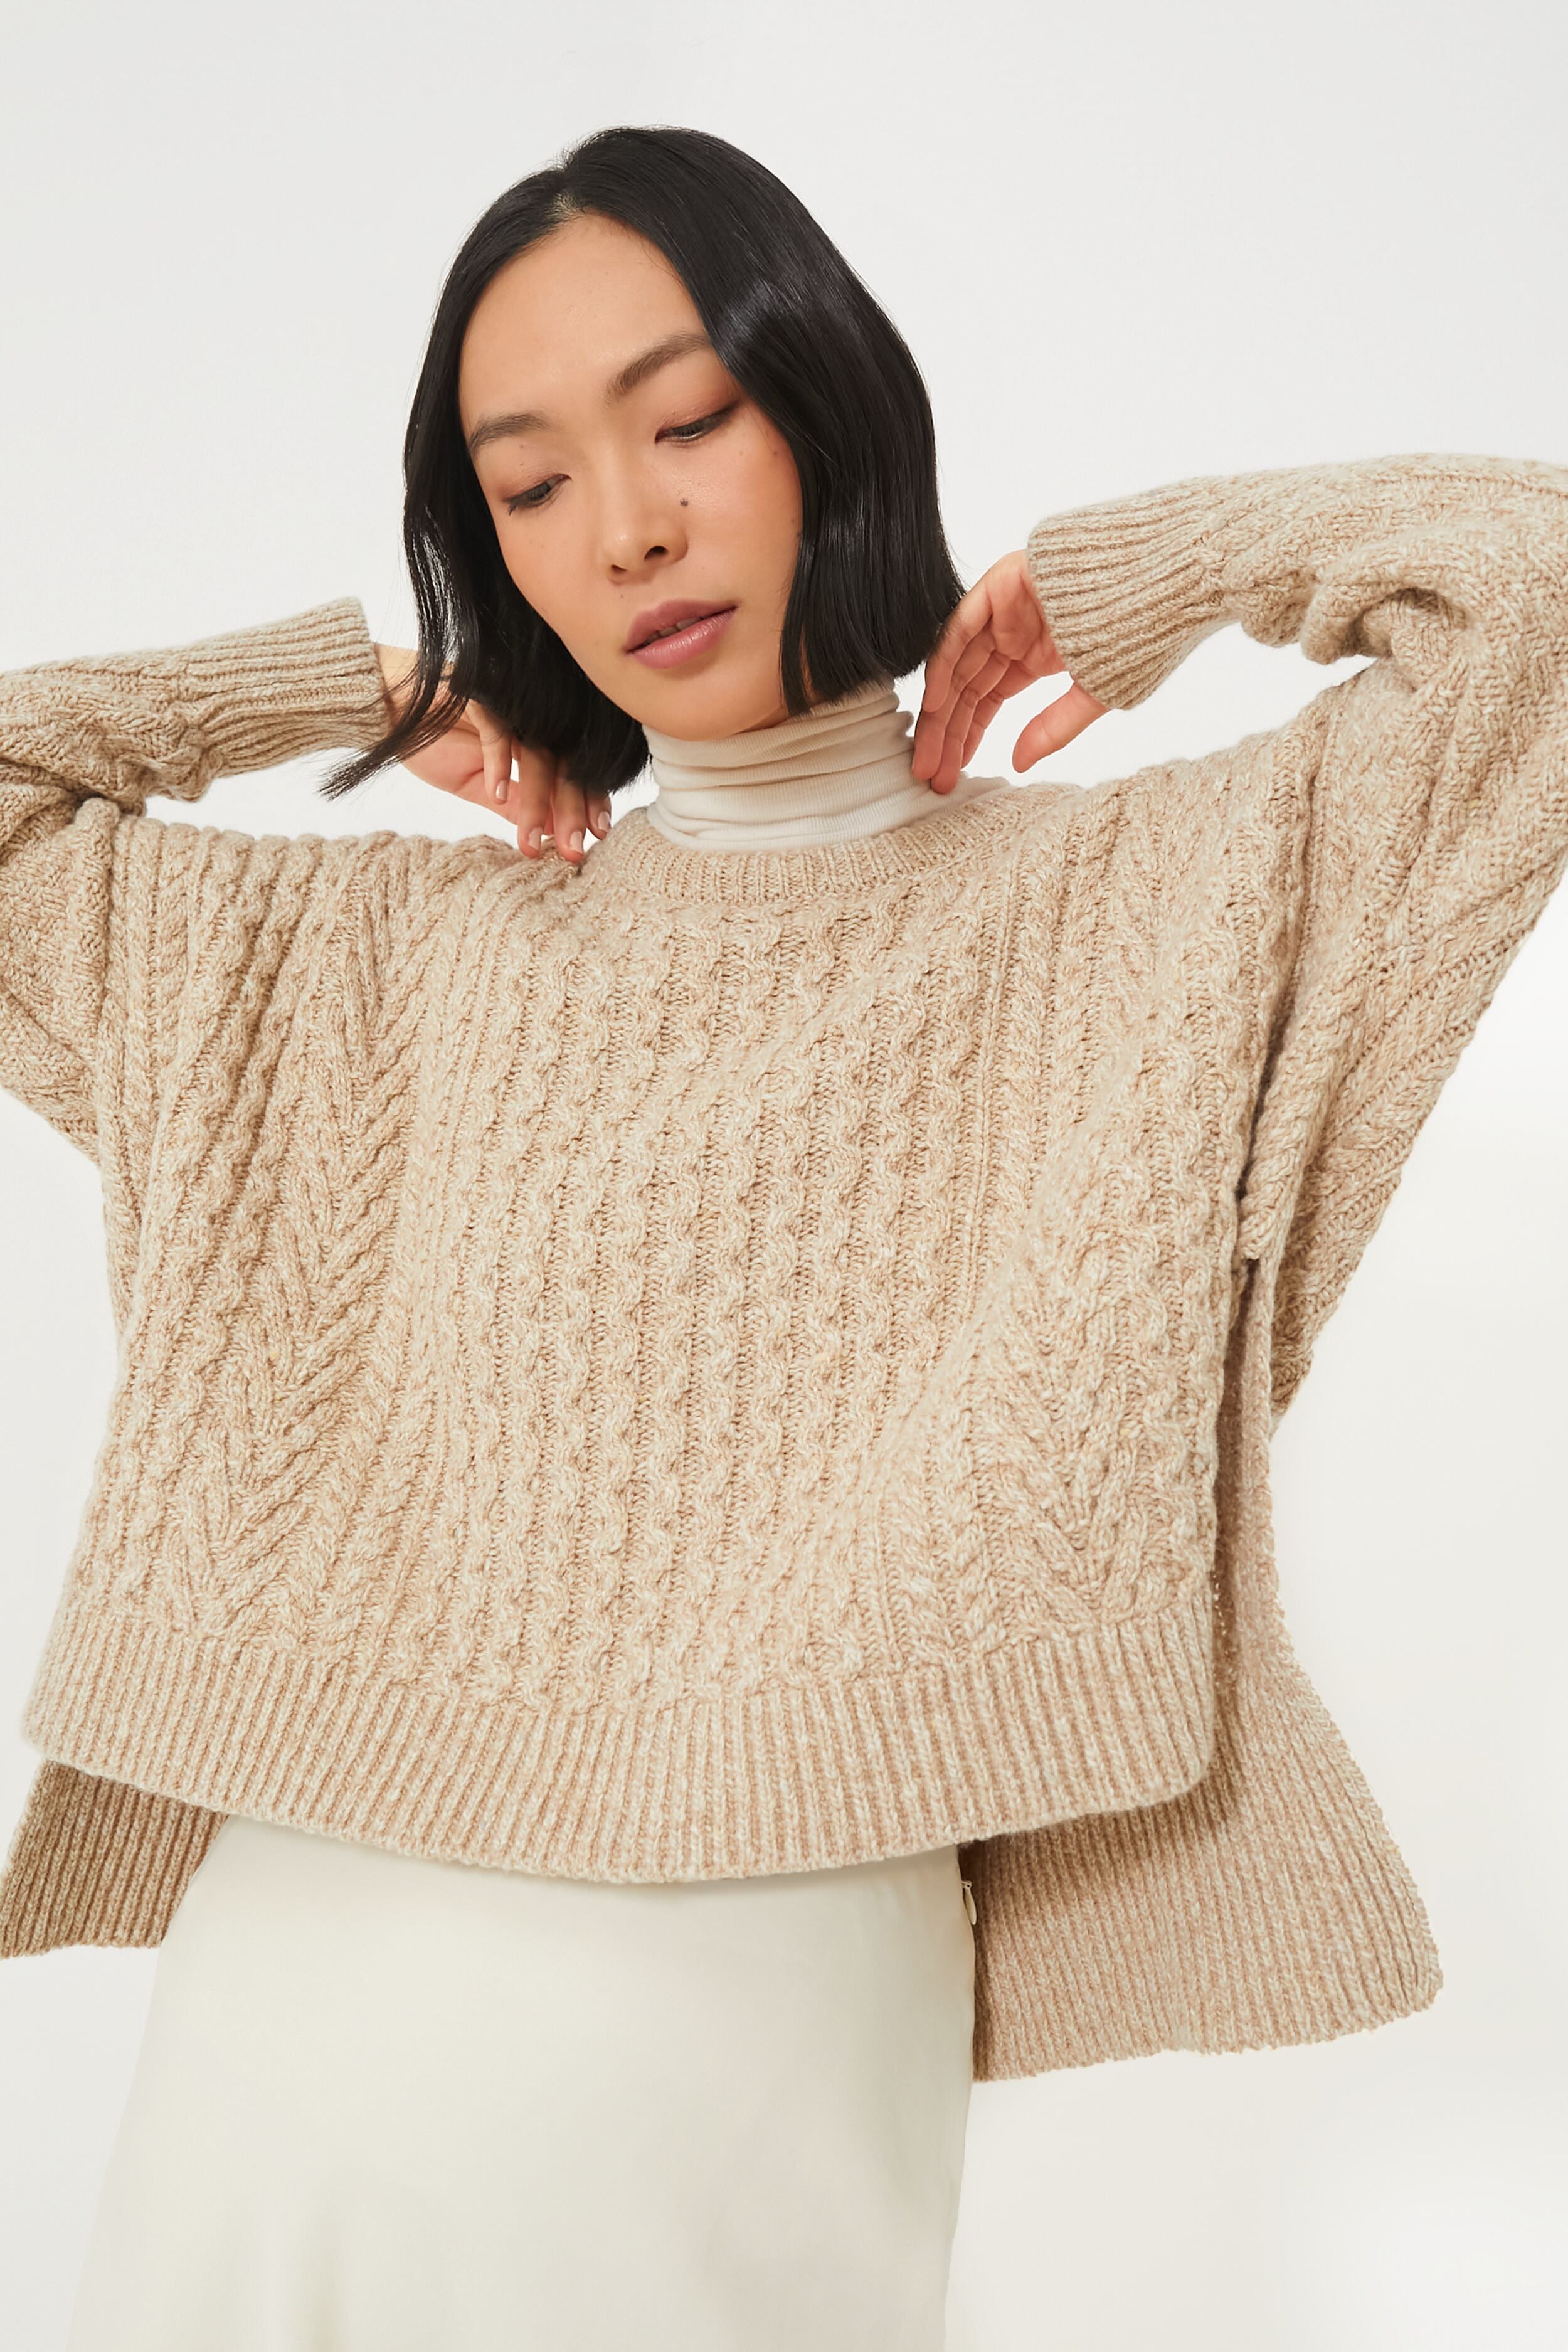 Womens - Shop By Color - Pinks & Purples - Sweaters - Aran Sweater